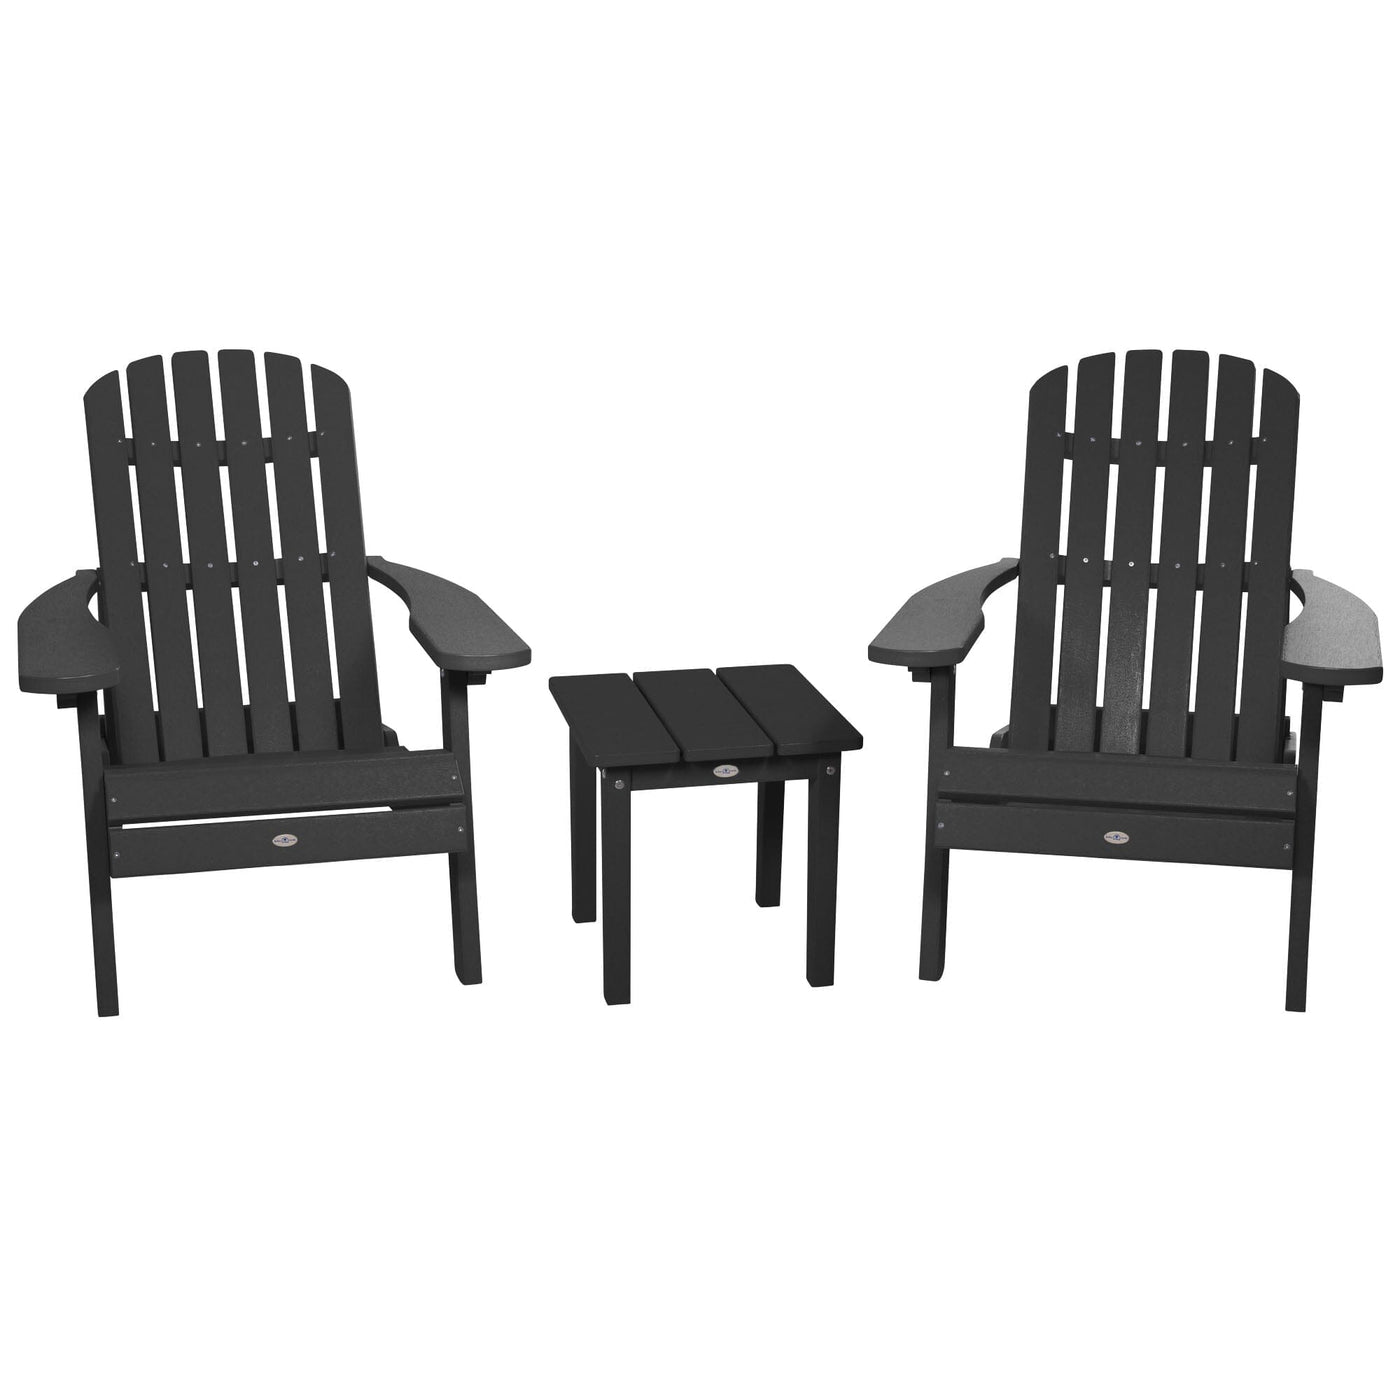 Two Cape Folding Adirondack Chairs and Side Table Set Kitted Set Bahia Verde Outdoors Black Sand 